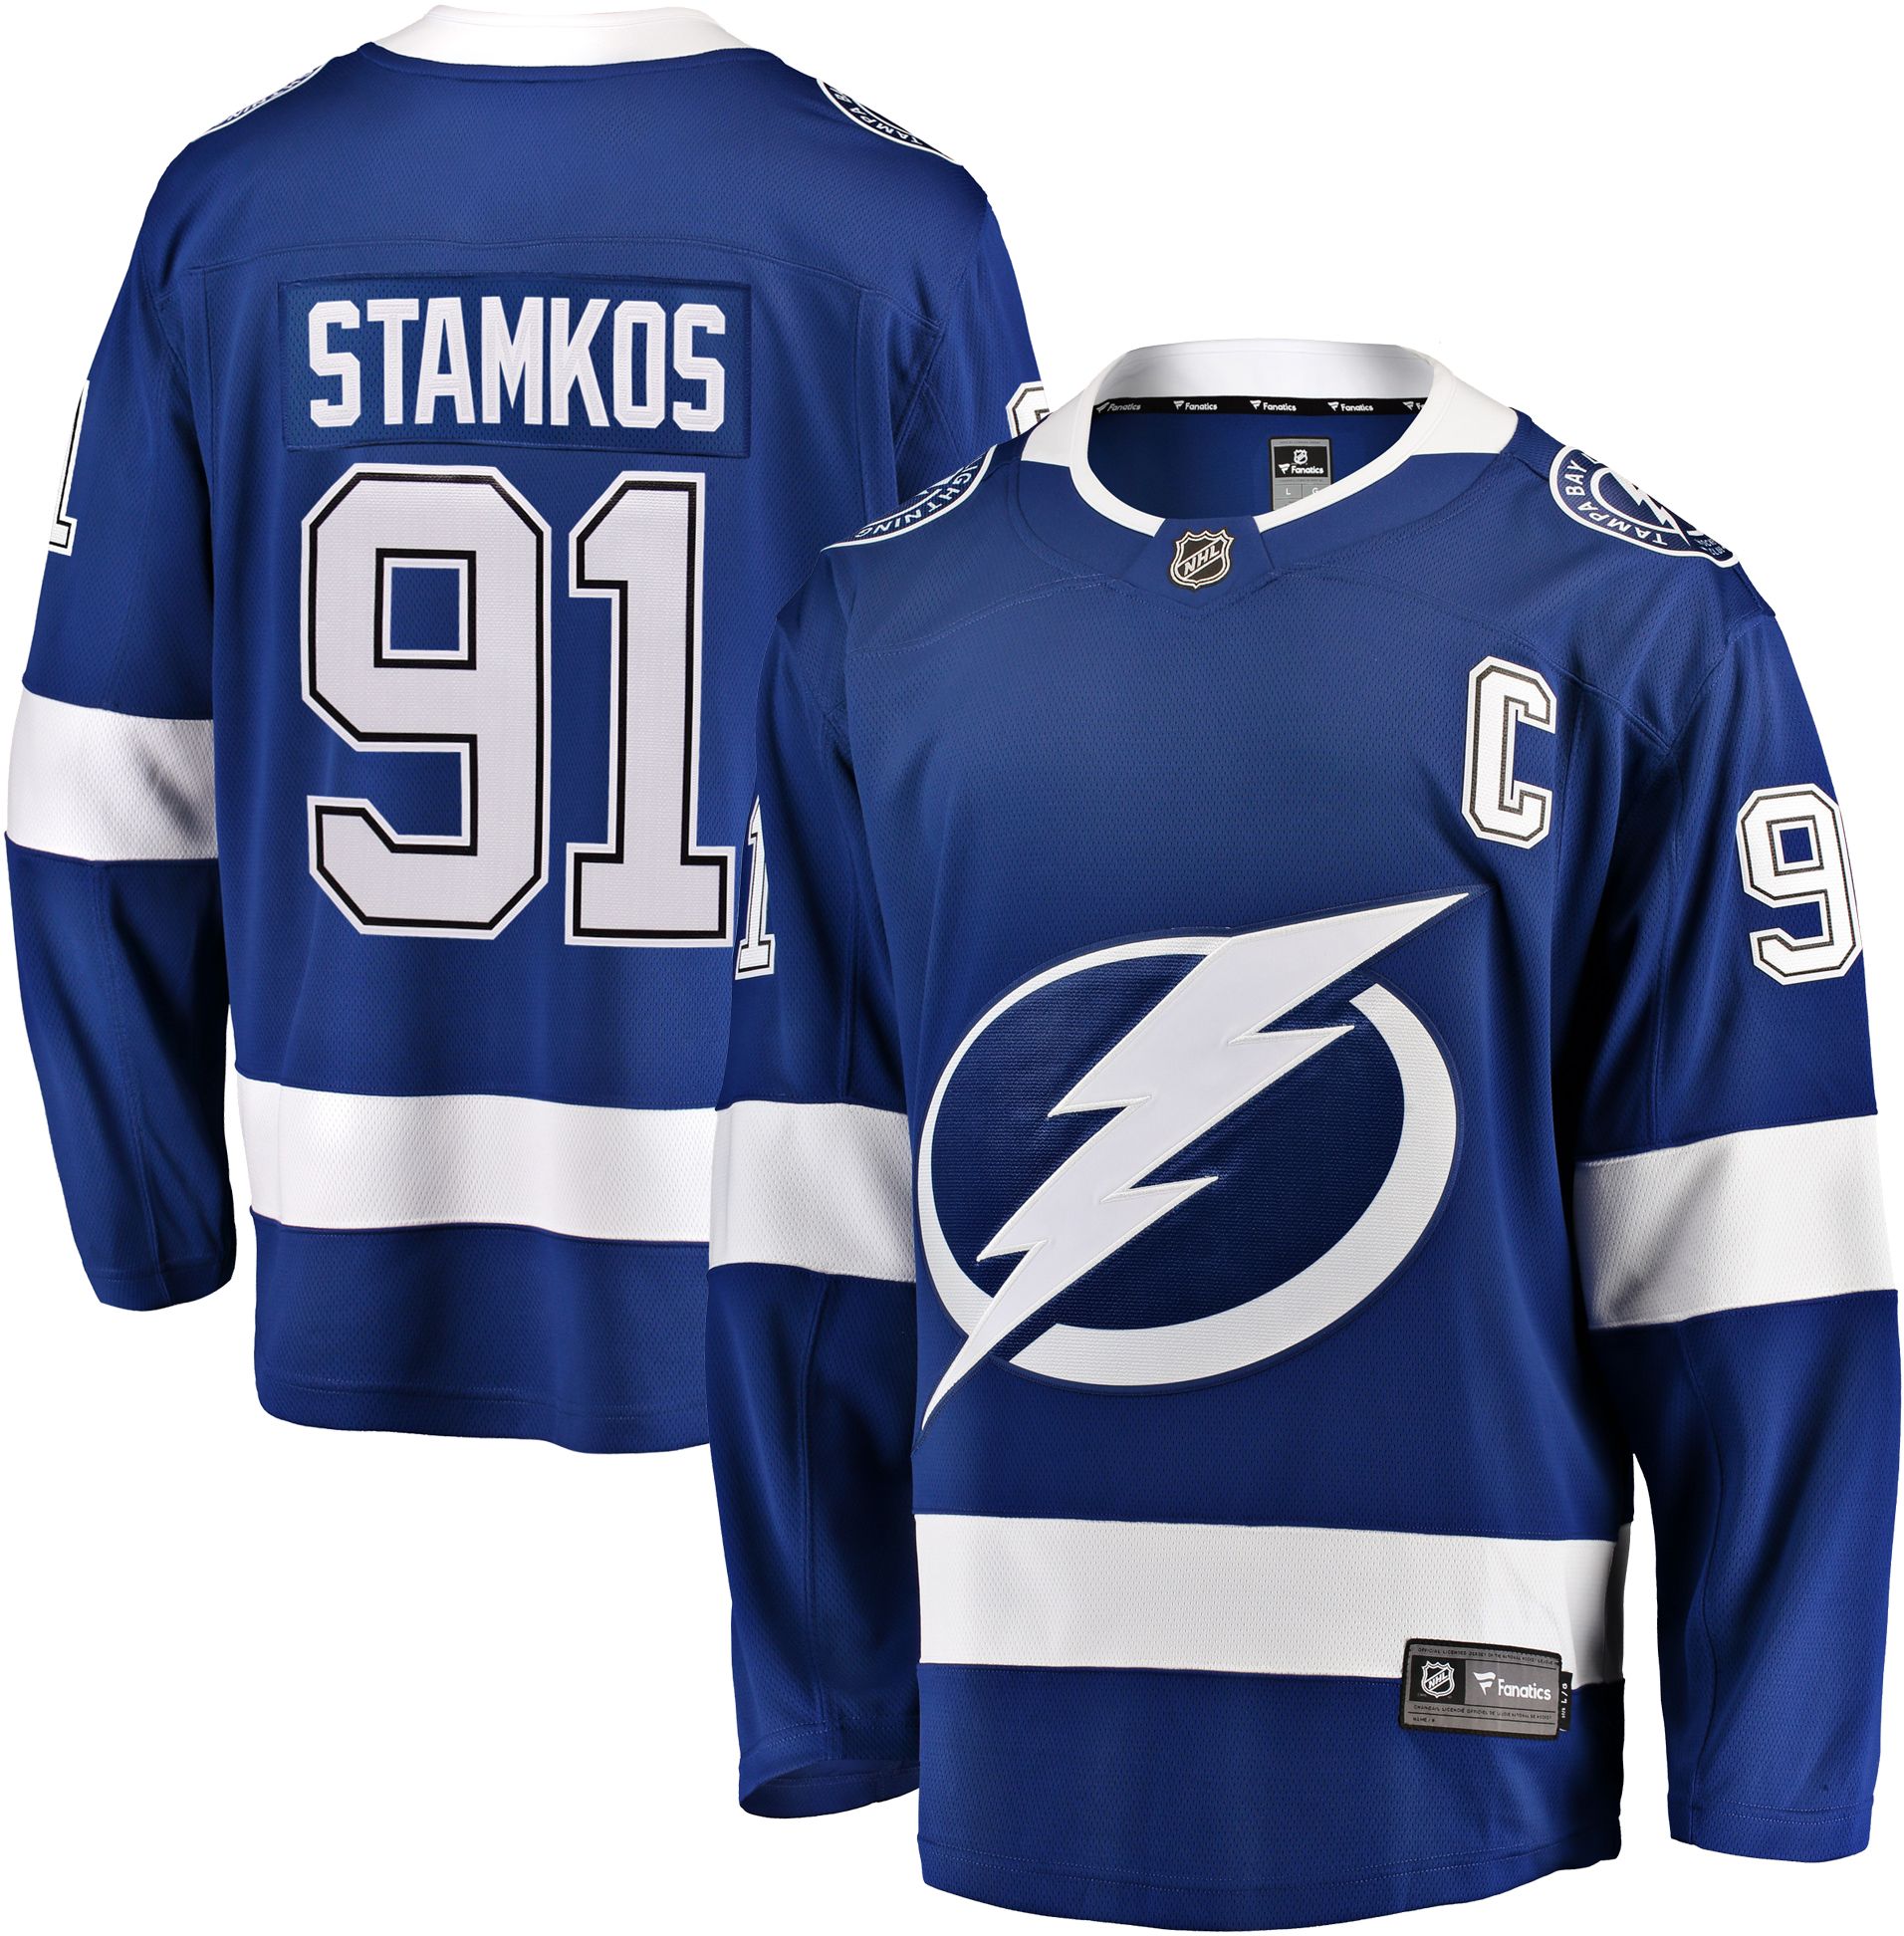 Adidas Tampa Bay Lightning No91 Steven Stamkos White Road Authentic Women's 2020 Stanley Cup Champions Stitched NHL Jersey